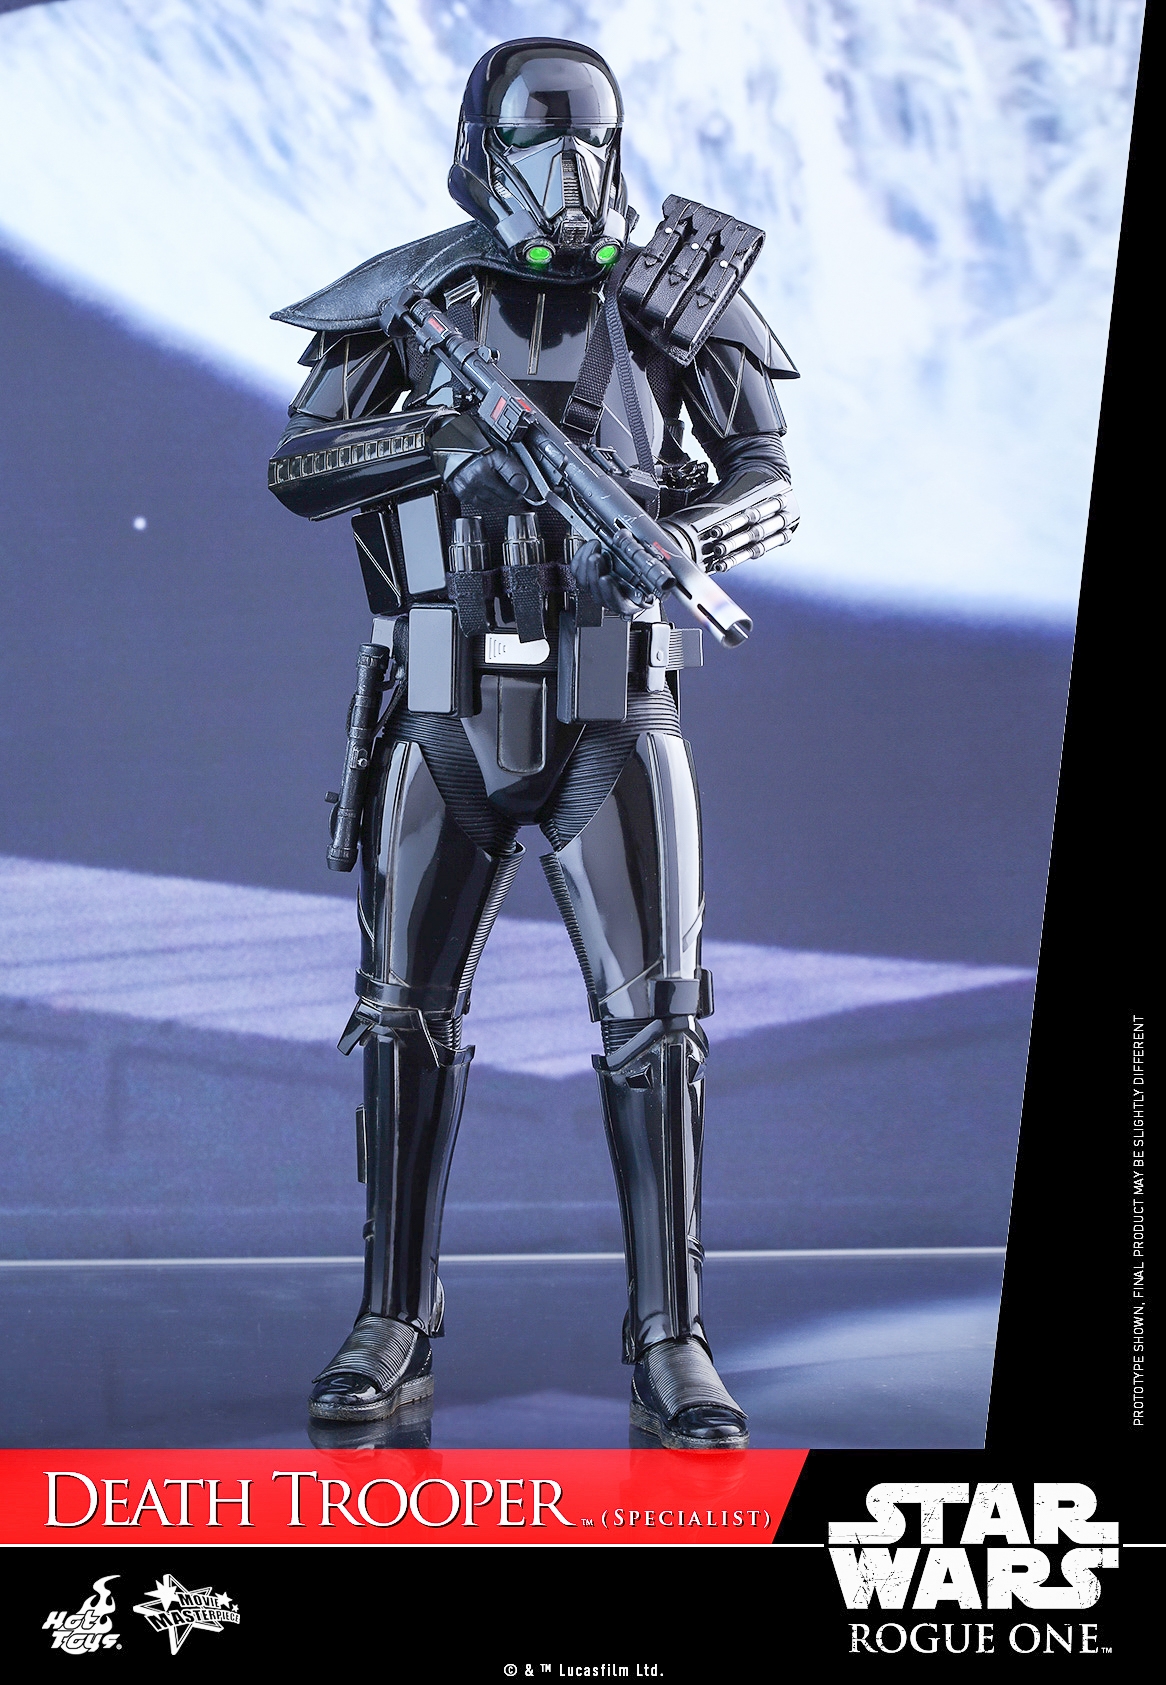 Hot-Toys-MMS385-Rogue-One-Death-Trooper-Specialist-001.jpg